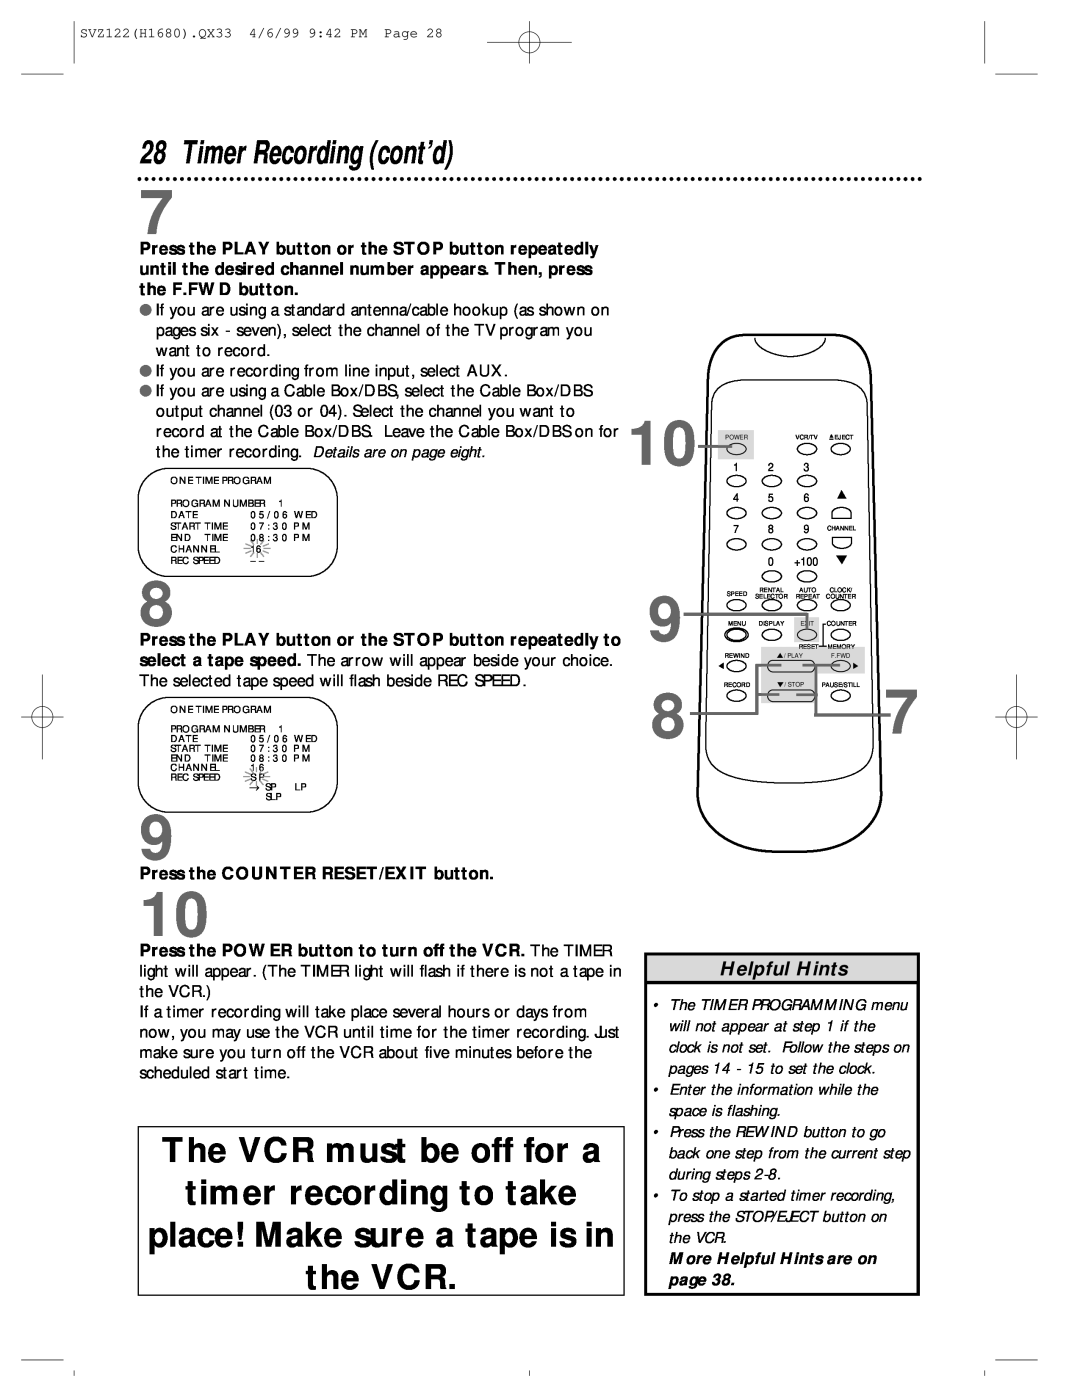 Philips SVZ122 owner manual Timer Recording cont’d, The VCR must be off for a timer recording to take, Helpful Hints 